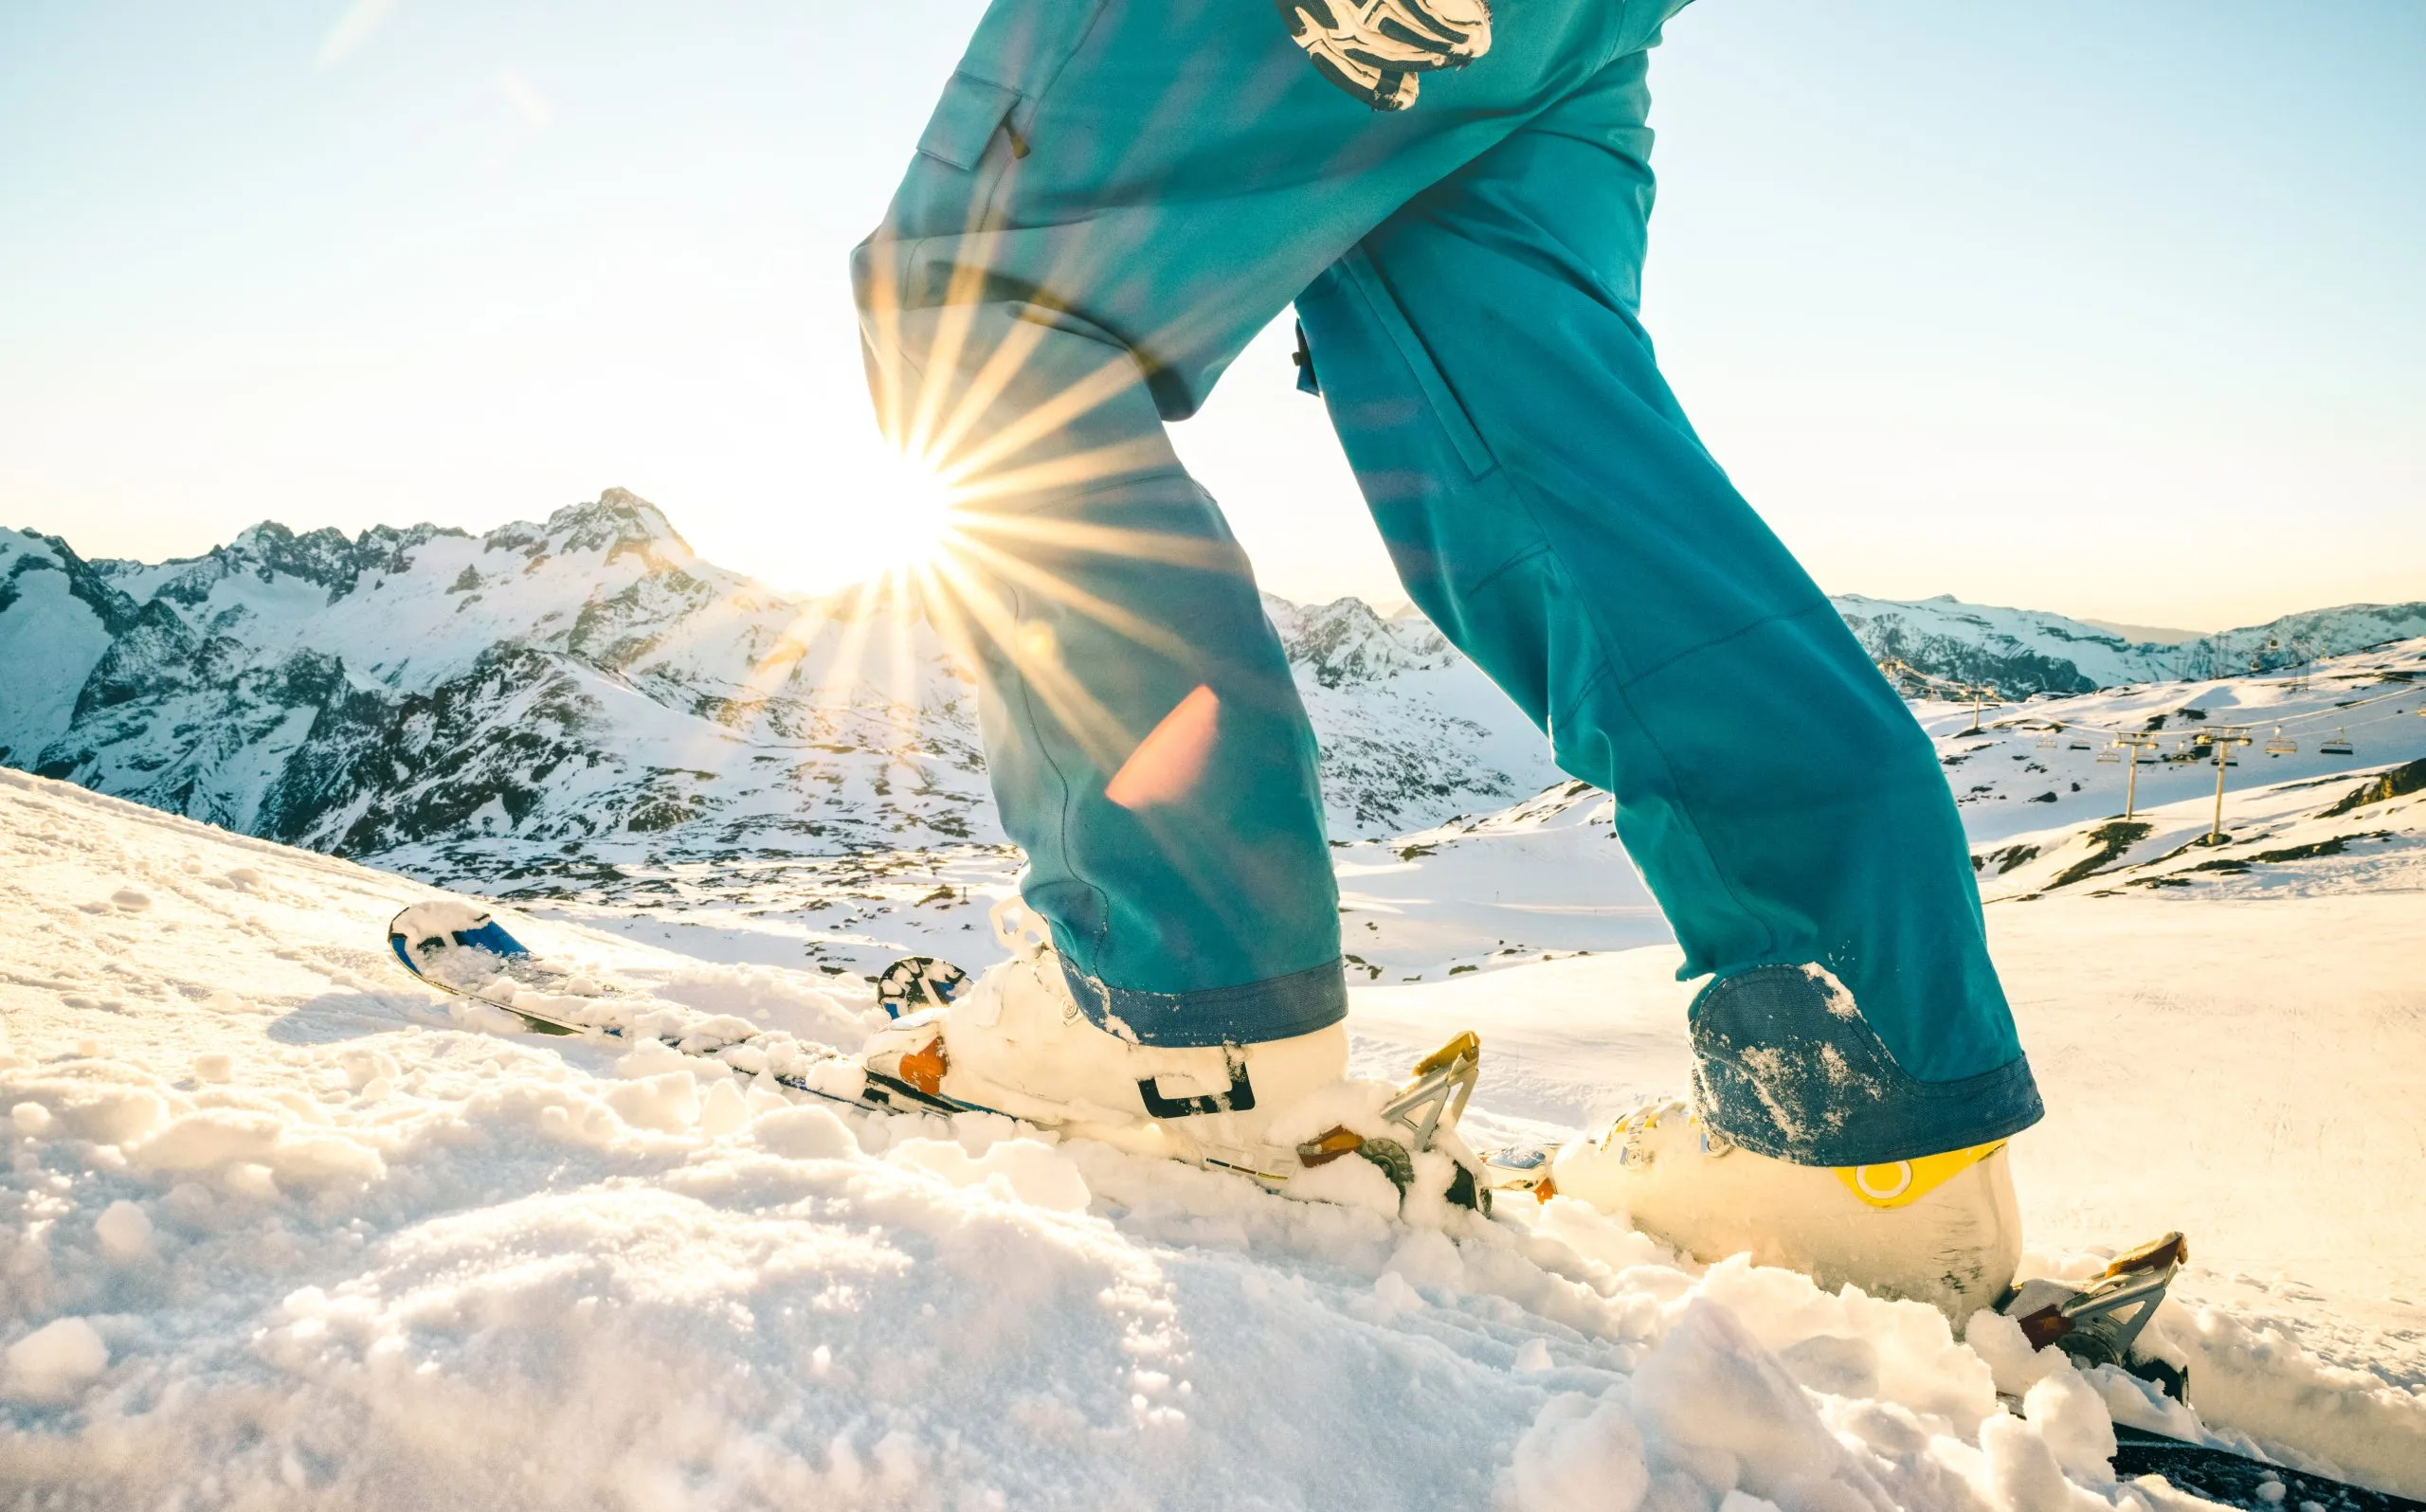 Legs of professional skier at sunset on relax moment in french alps ski resort - Winter sport concept with adventure guy on mountain top ready to ride down - Side view point with azure vintage filter